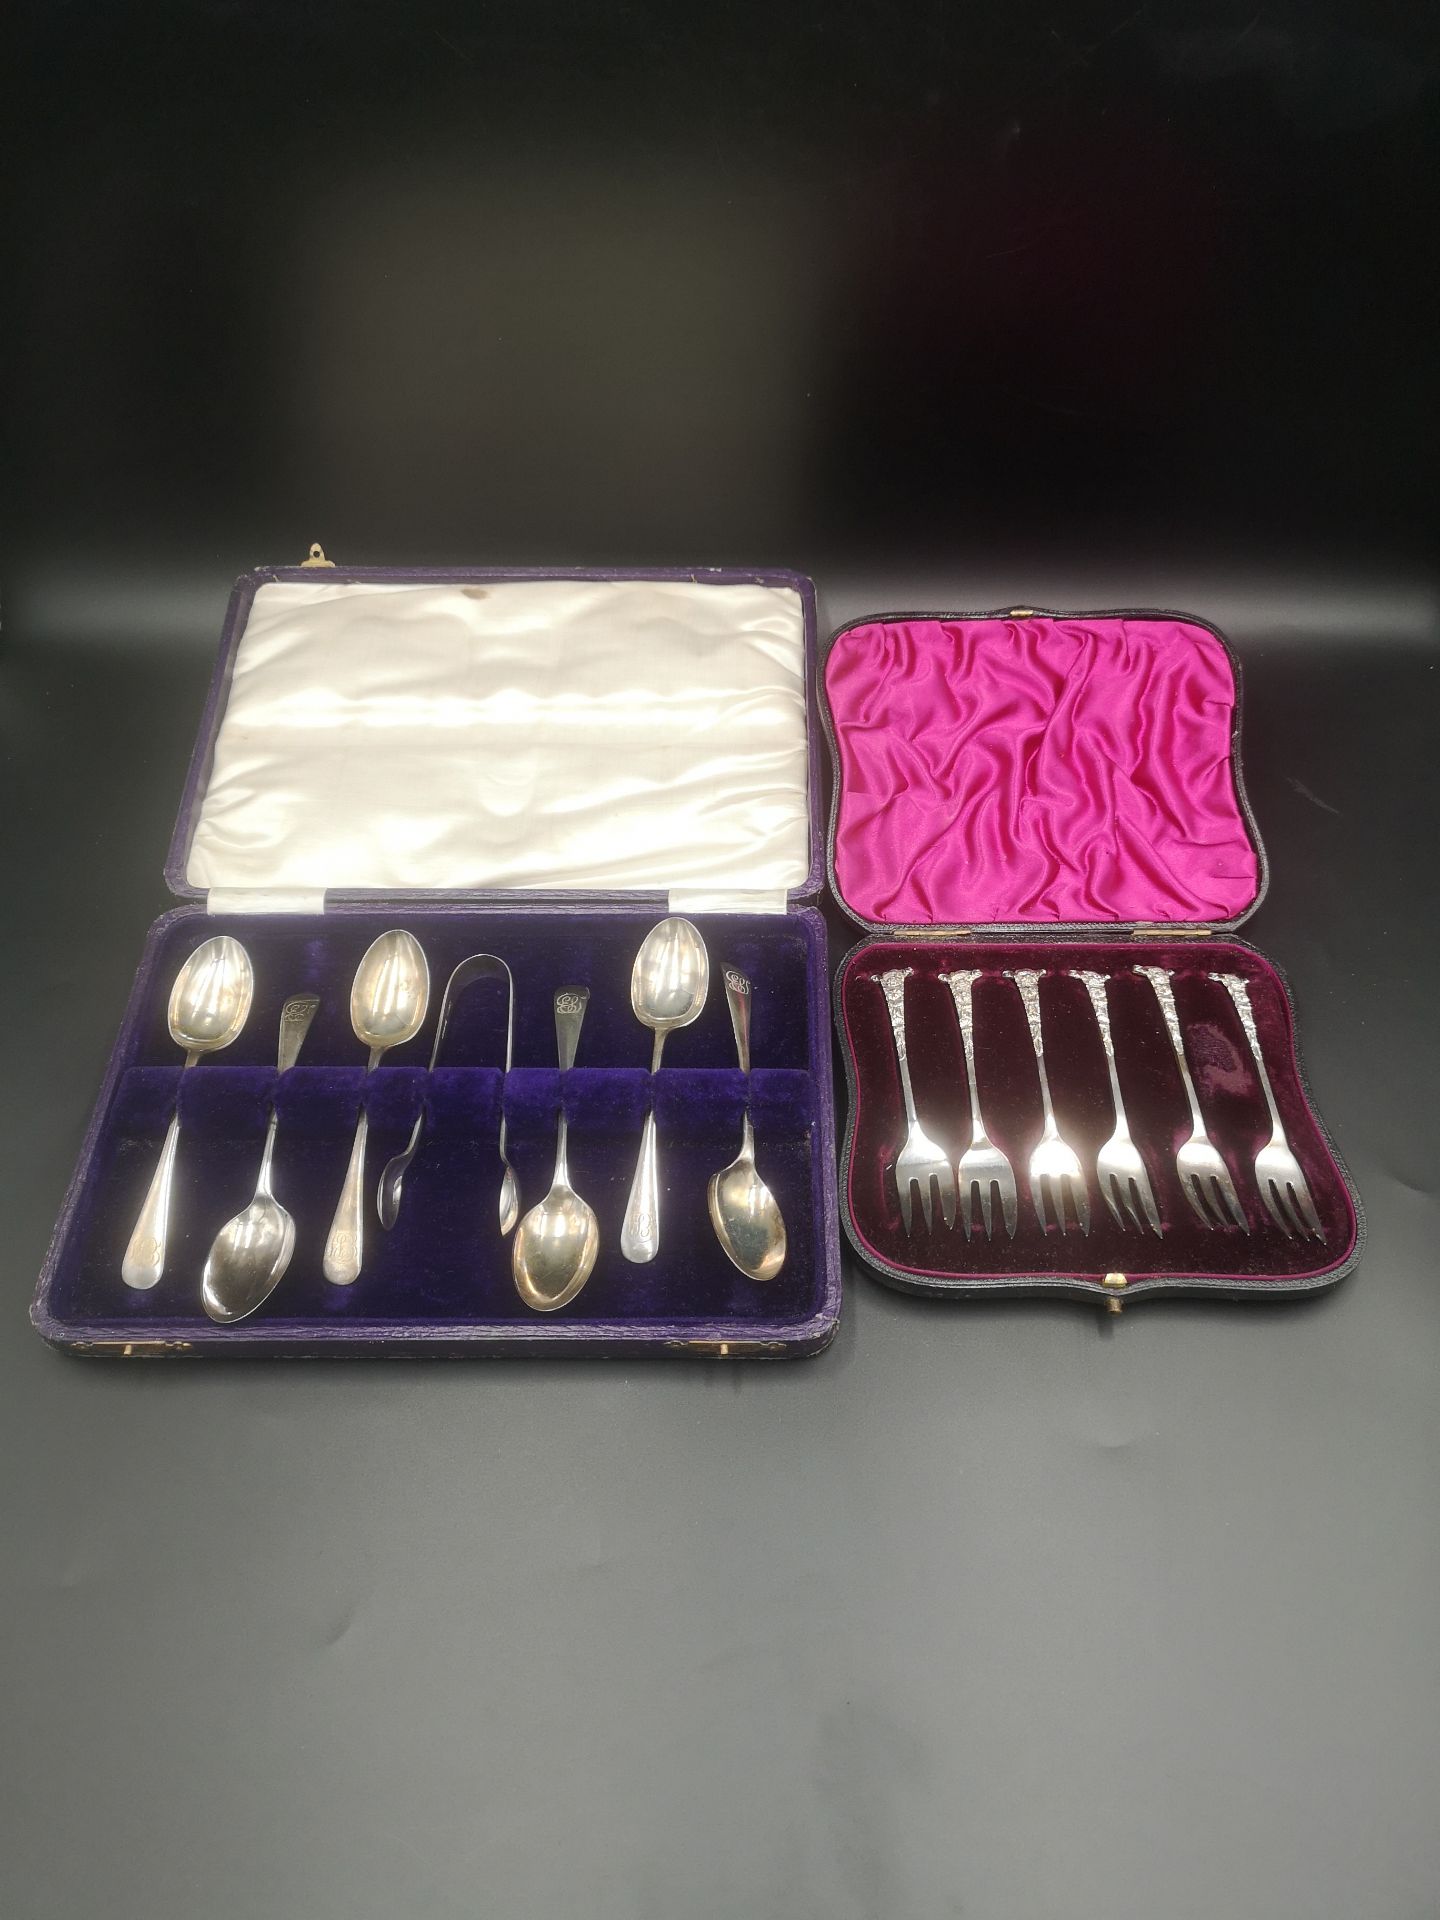 Boxed set of six silver tea spoons together with a boxed set of silver forks